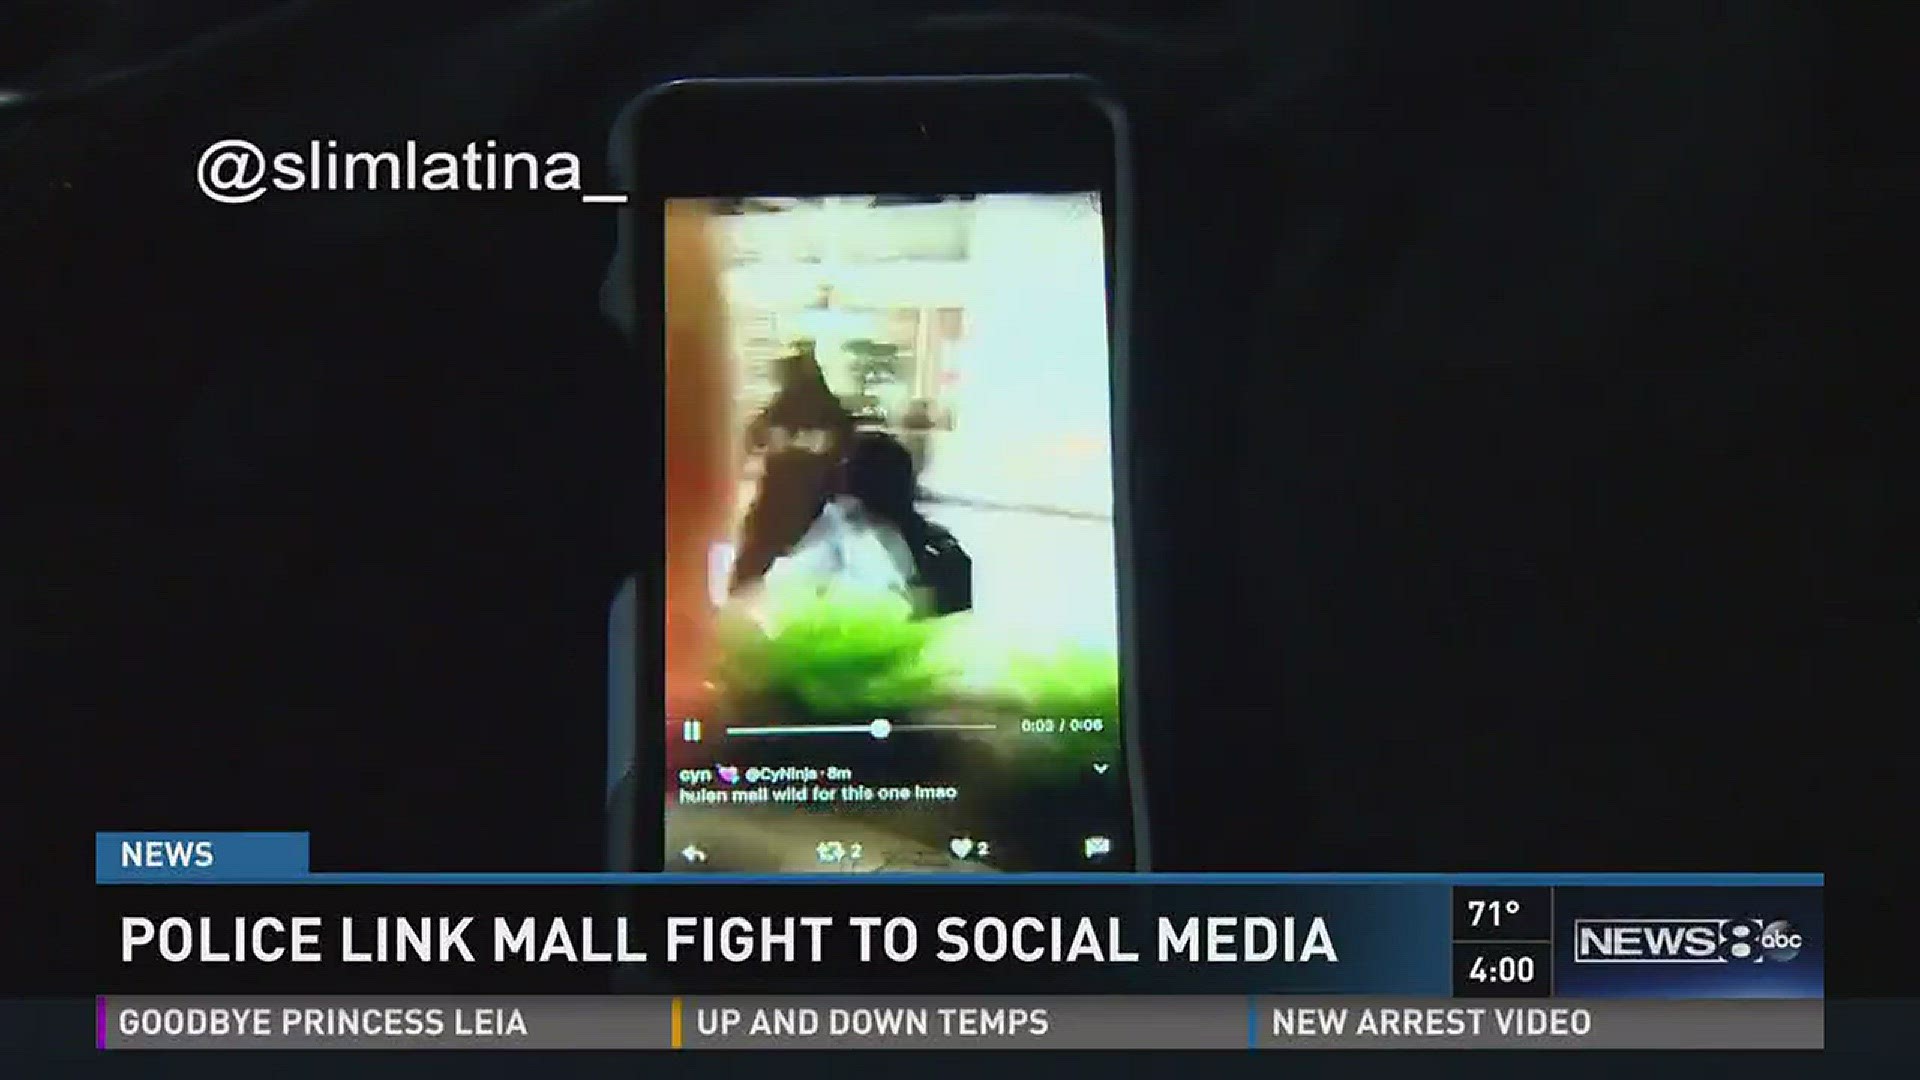 Police link mall fight to social media